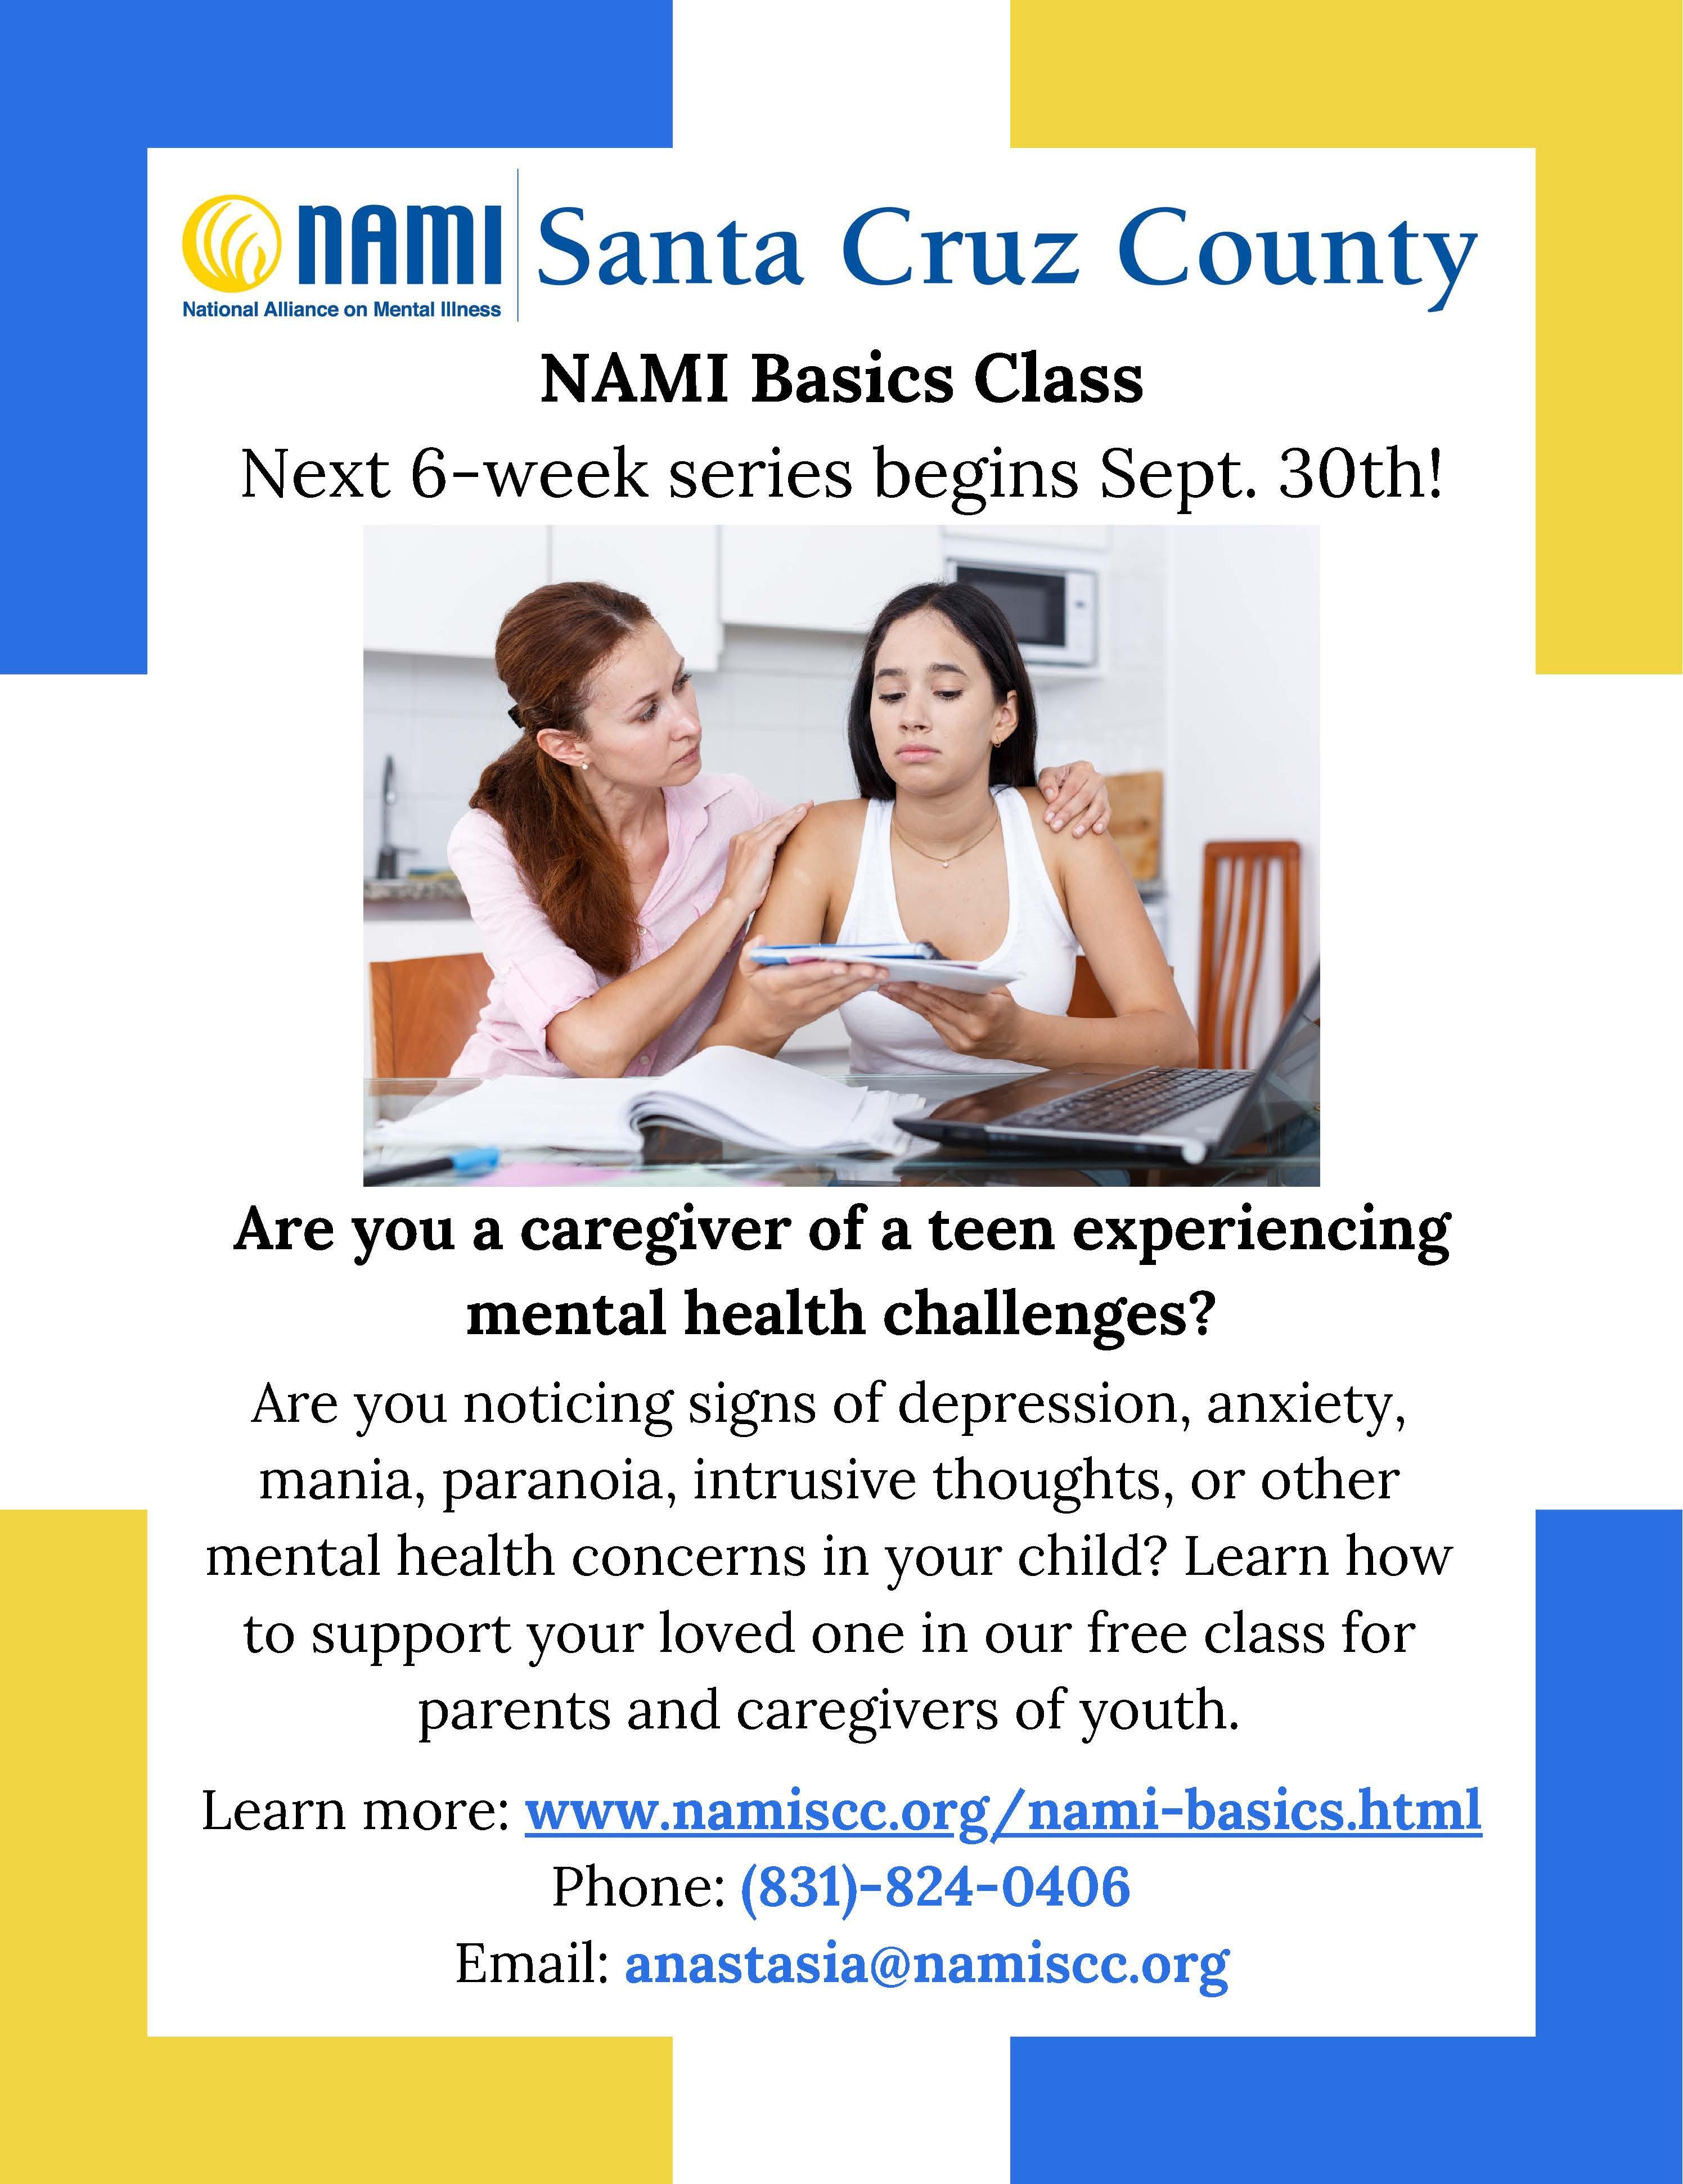 National Alliance on Mental Health class; for details call 831-824-0406